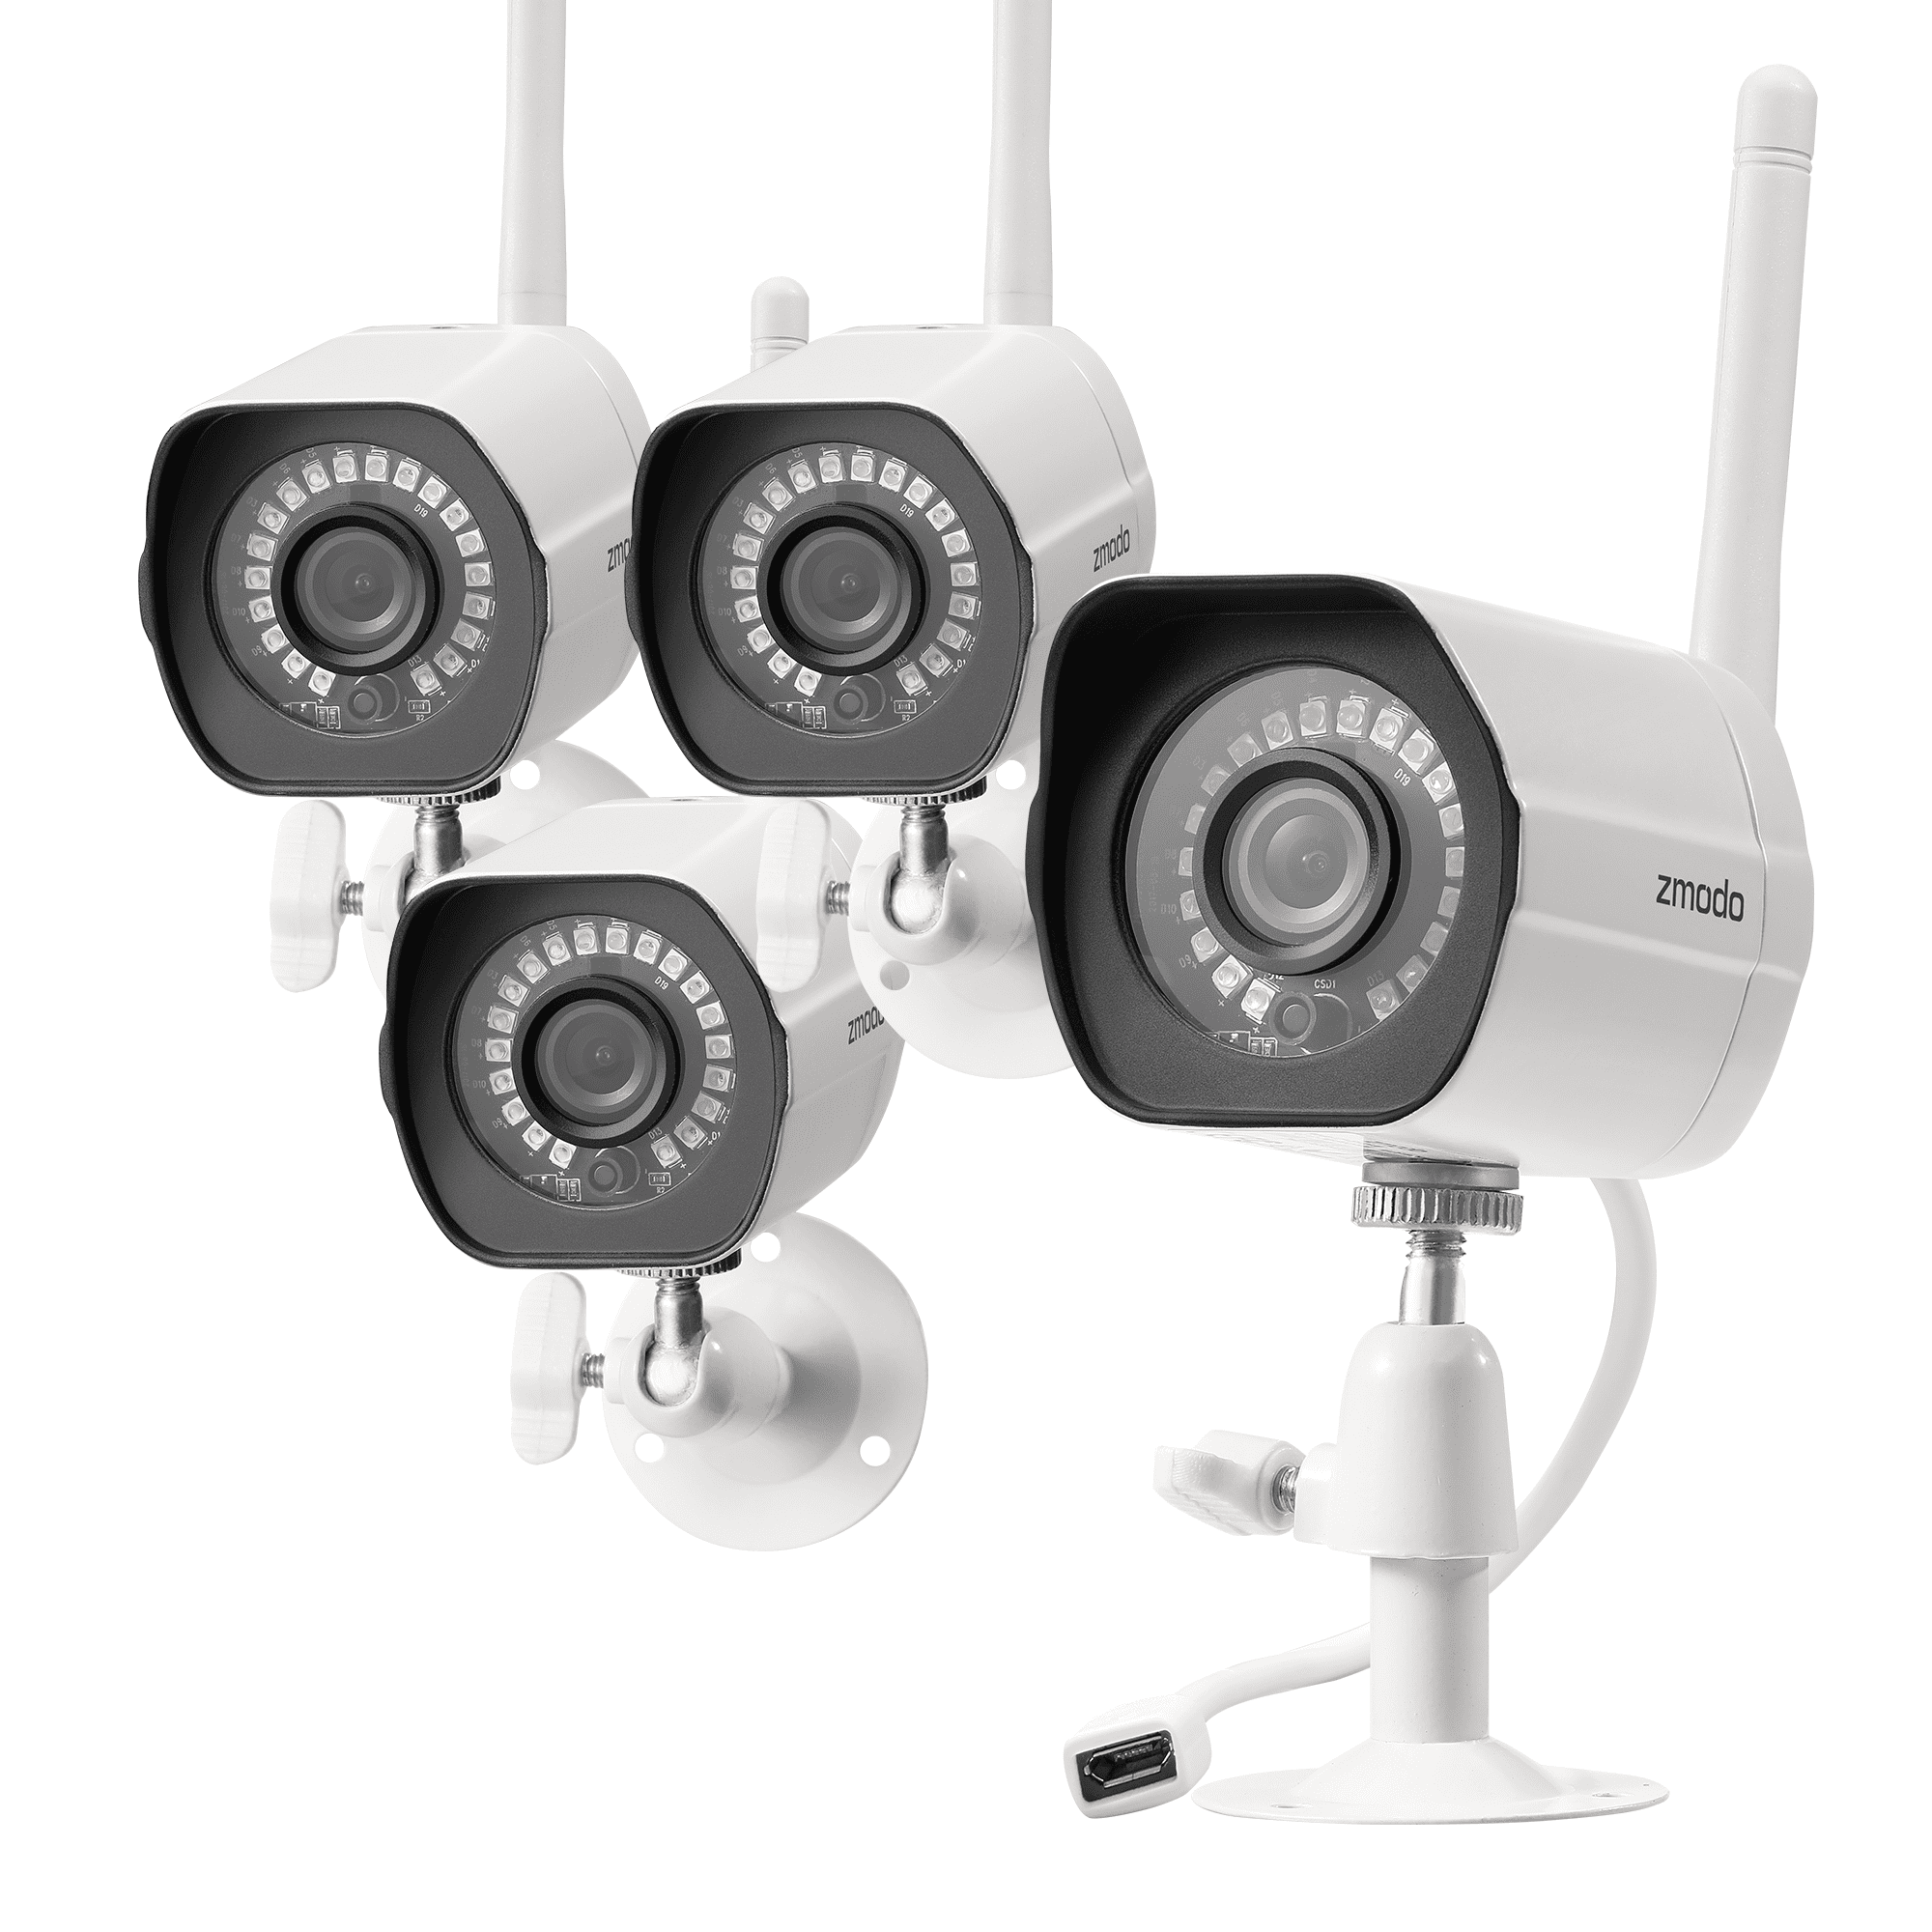 Camera Cctv Outdoor Home Security System Ir Ip Wifi 720 Hd Night Vision Wireless 